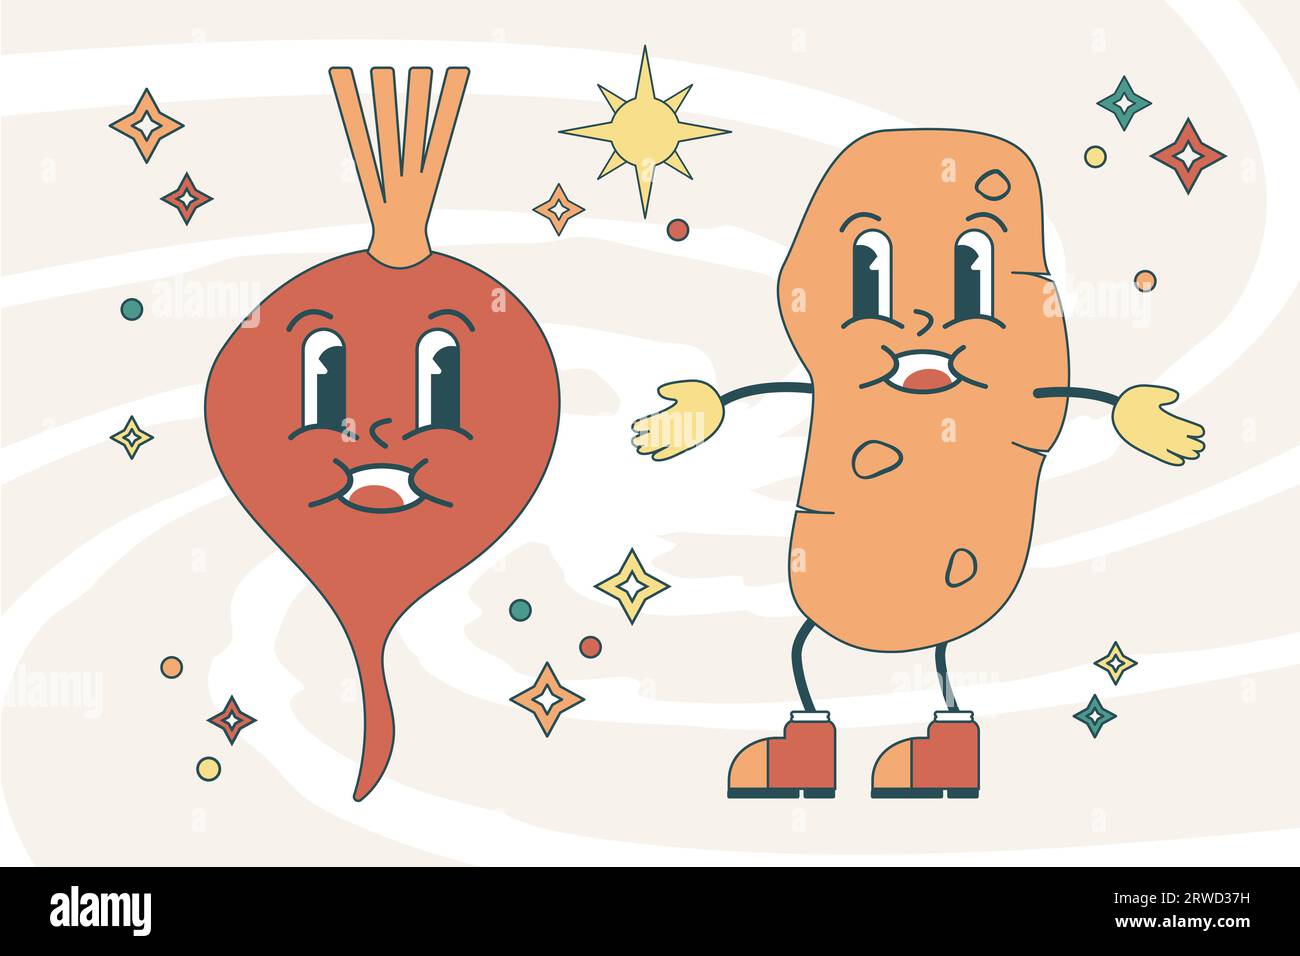 Groovy Cute Illustration of Beetroot and Potato Characters Stock Vector